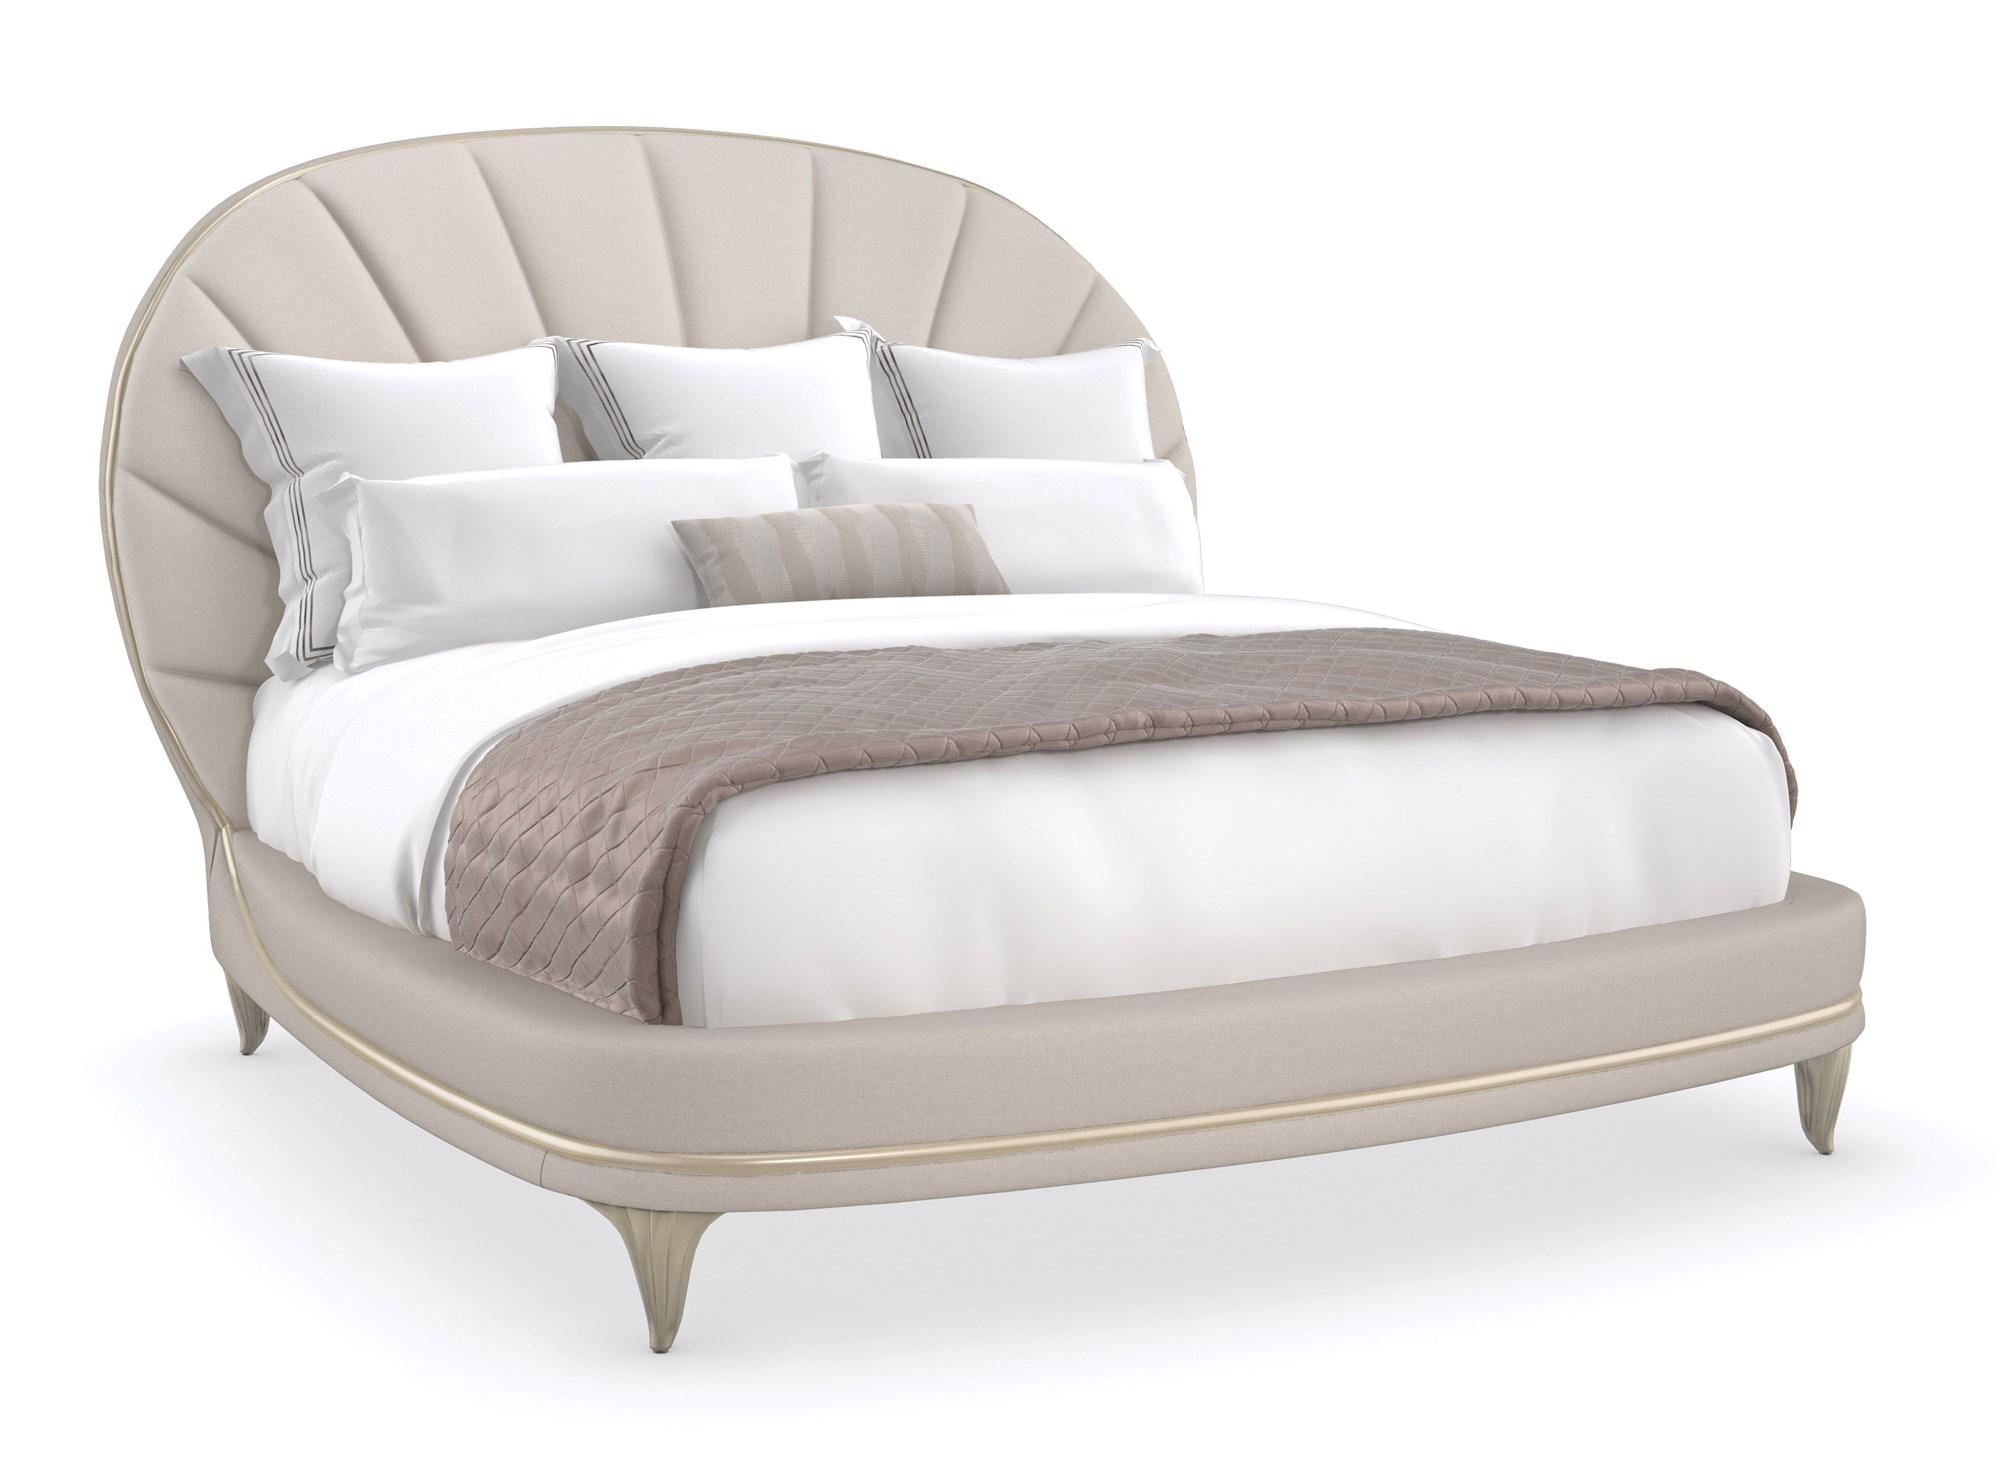 Contemporary Platform Bed LILLIAN C093-020-101-Q in Taupe, Gold Fabric